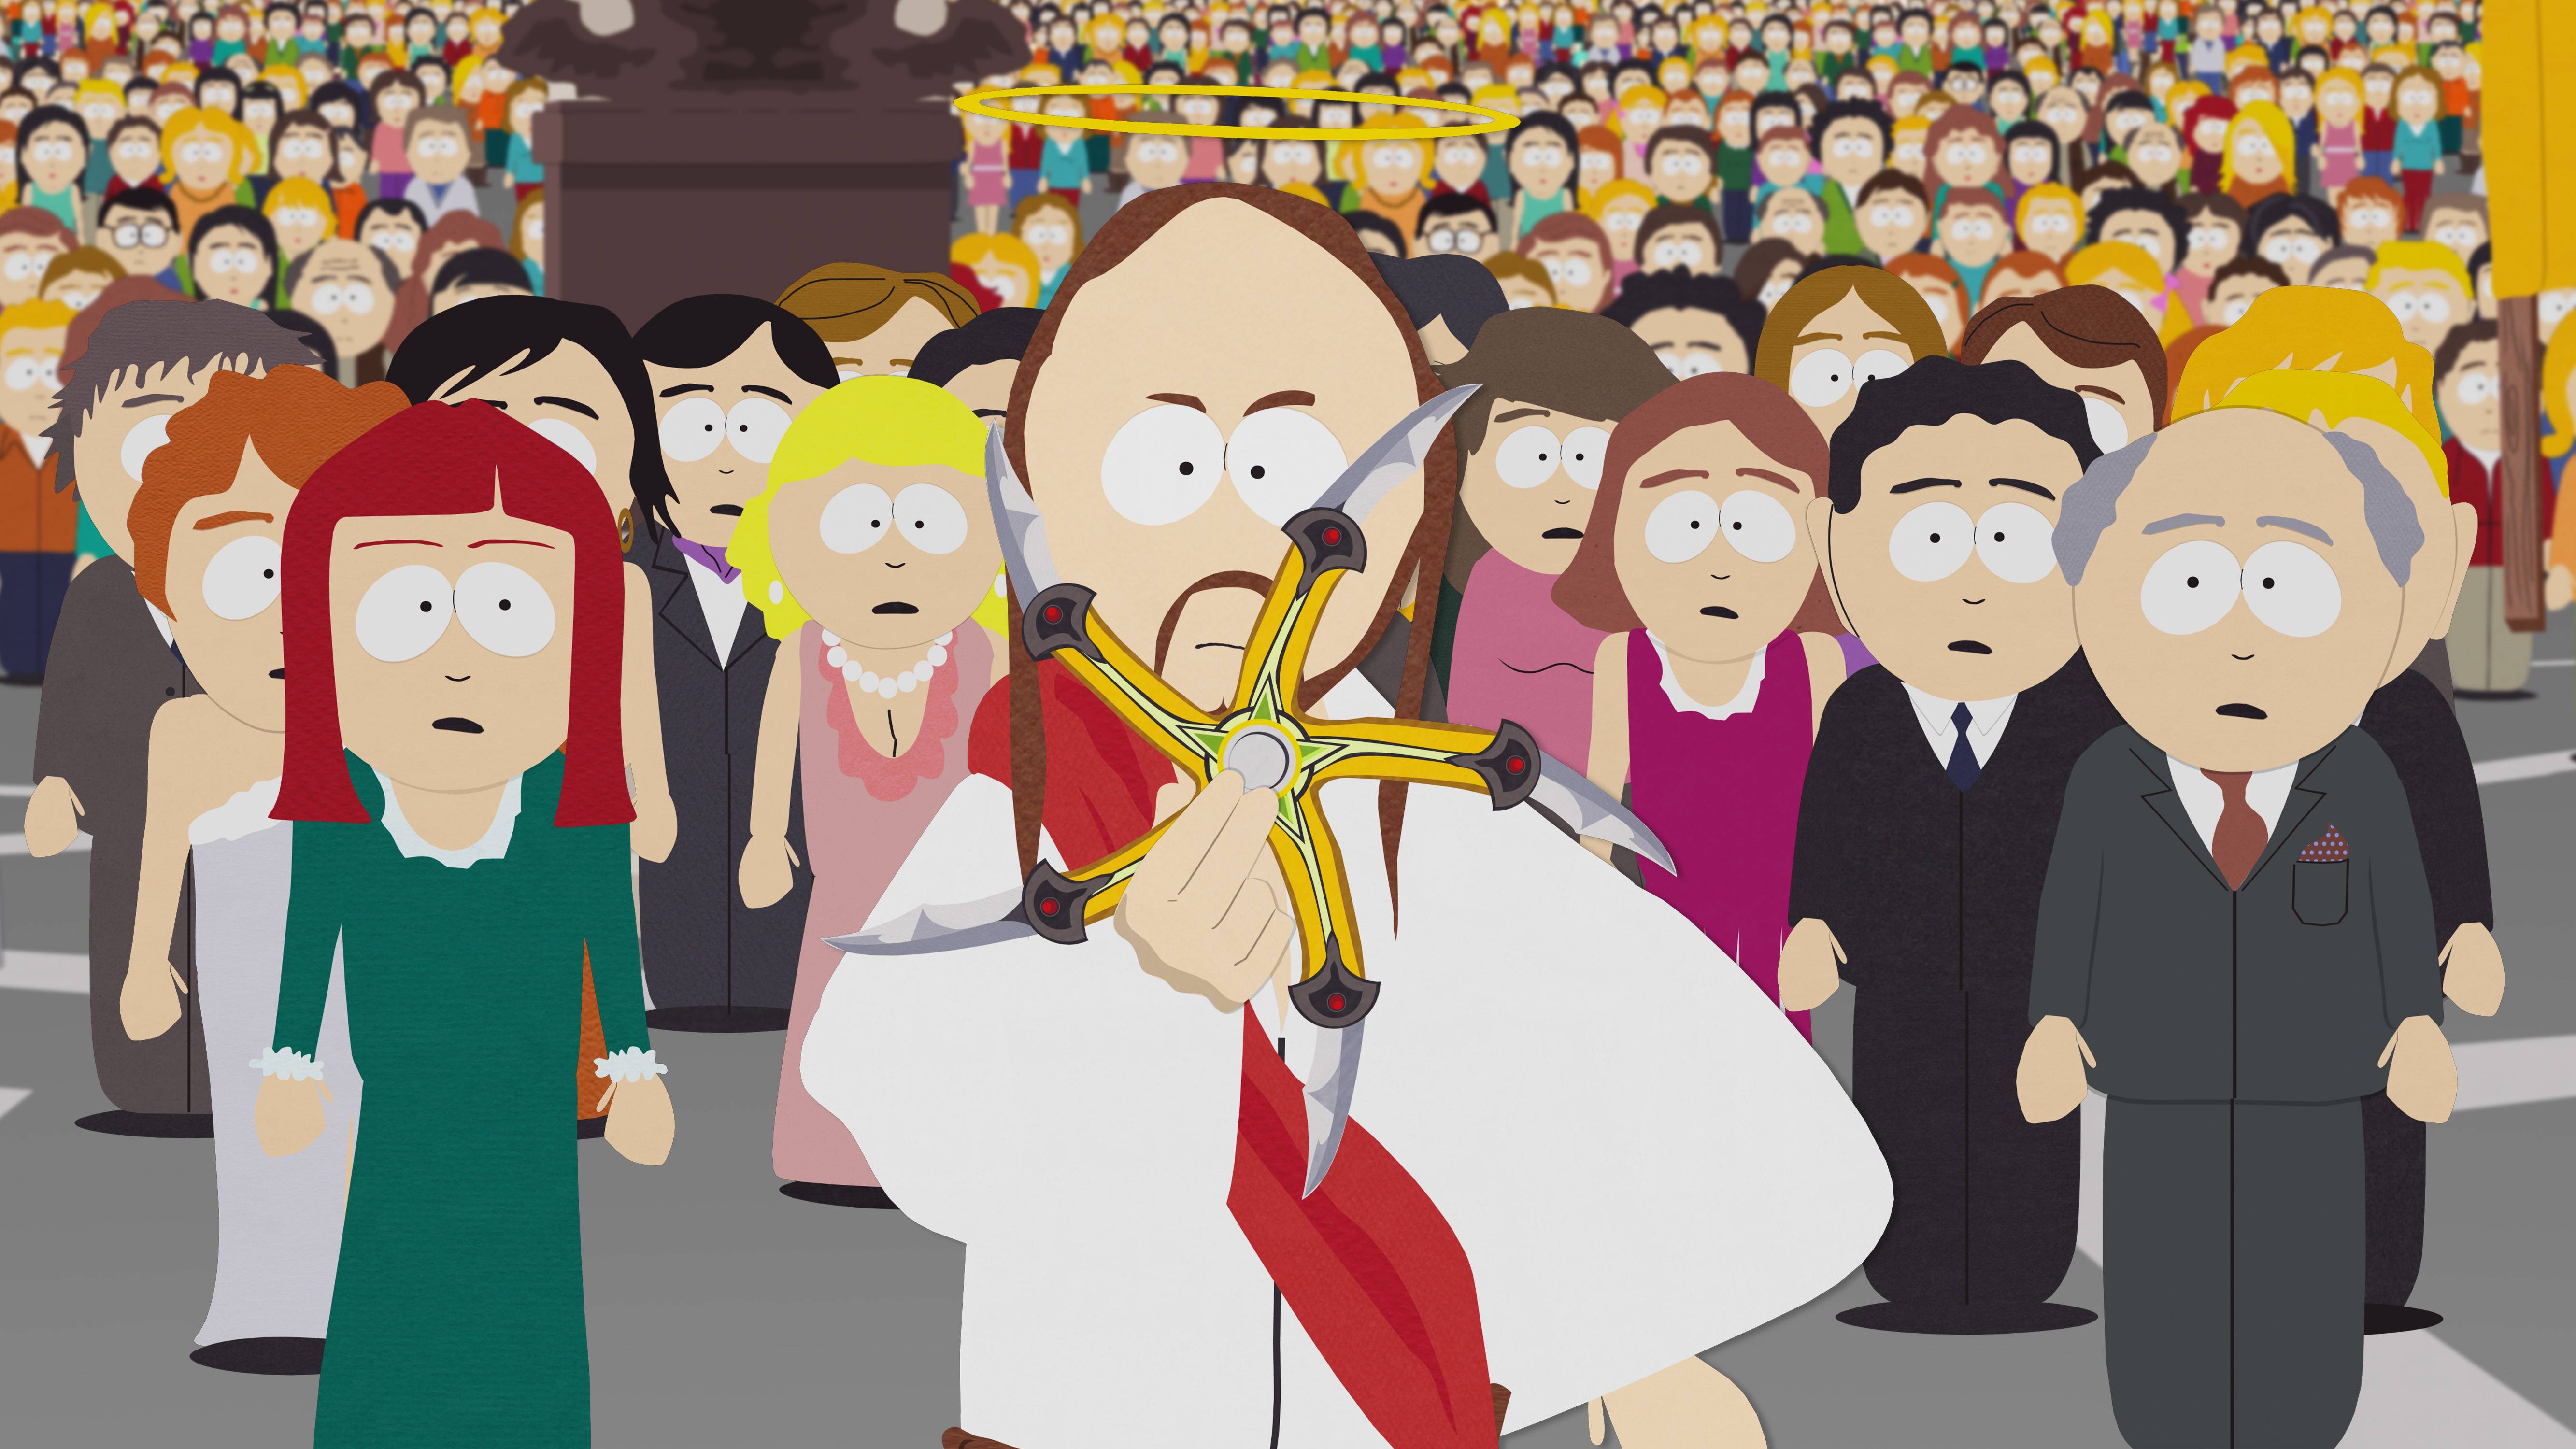 The True Story Behind The Creation Of South Park